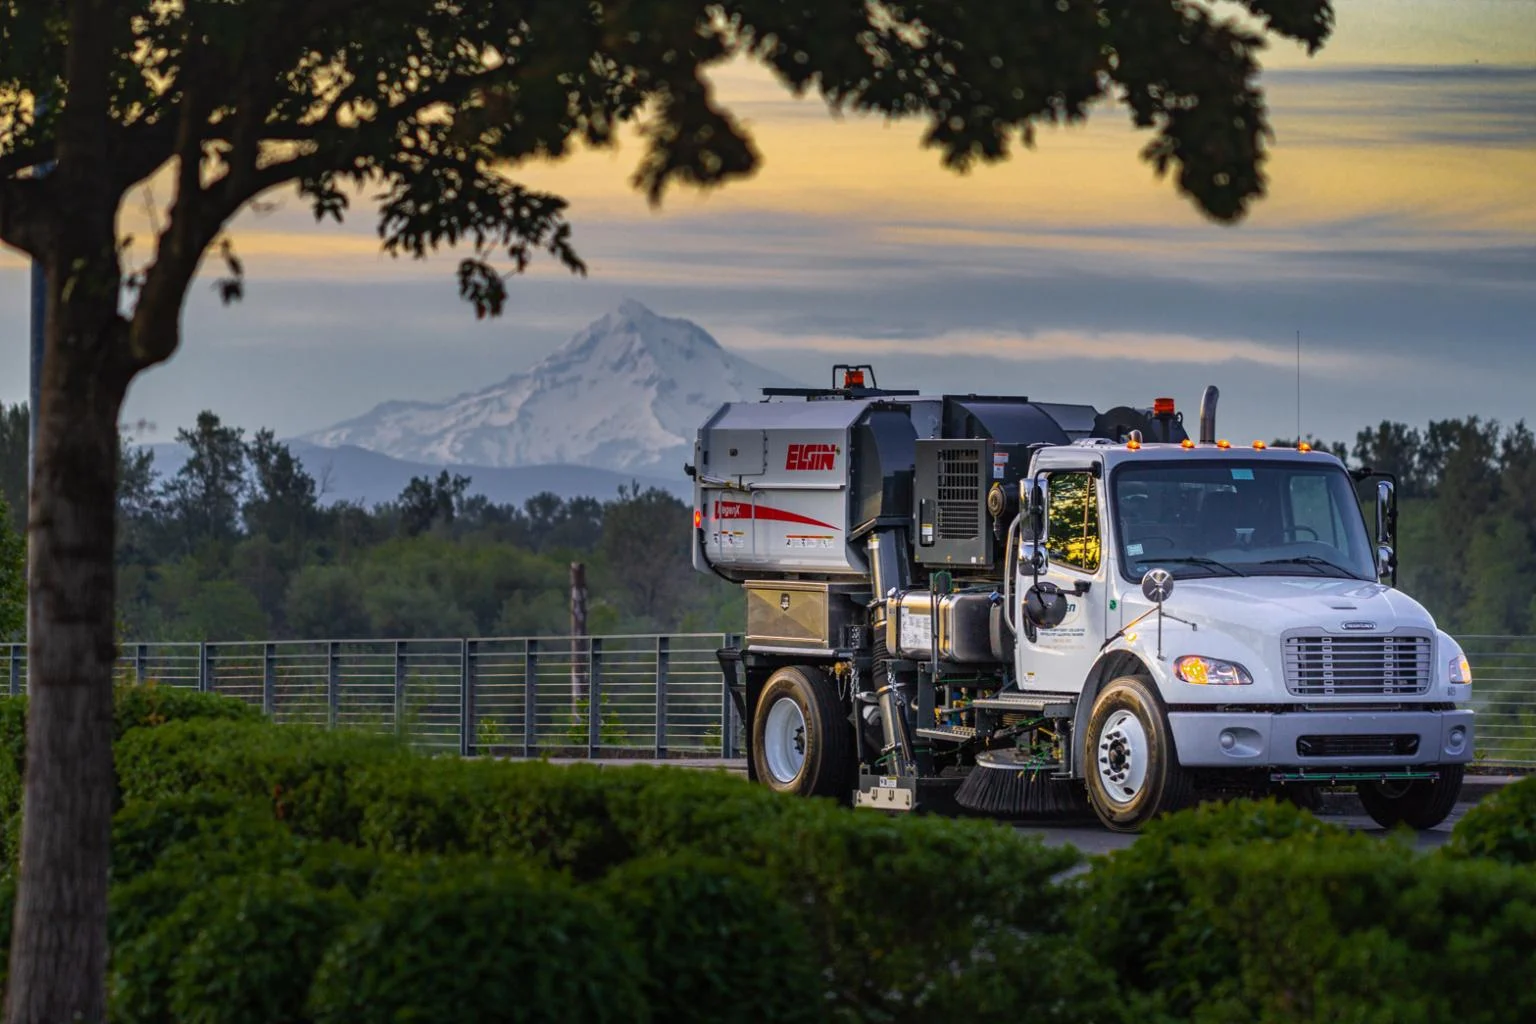 Elgin Sweeper Introducing New Non-CDL Sweeper Models... and More